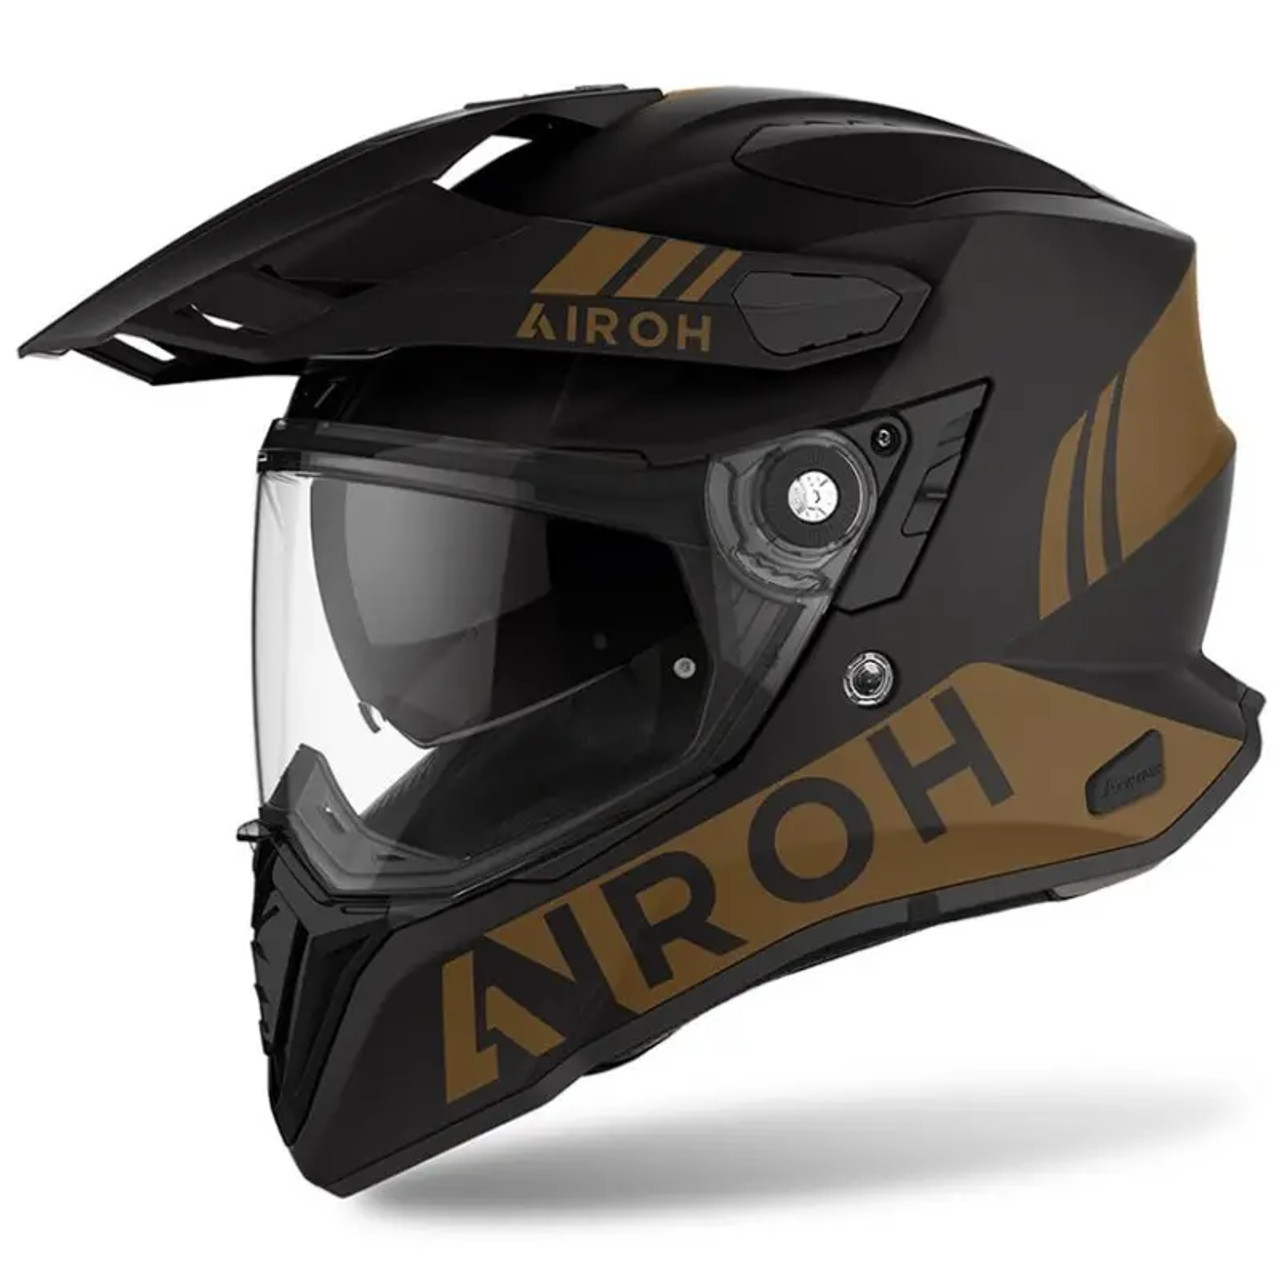 Casco Integrale On-Off Moto Touring Airoh COMMANDER Gold Opaco